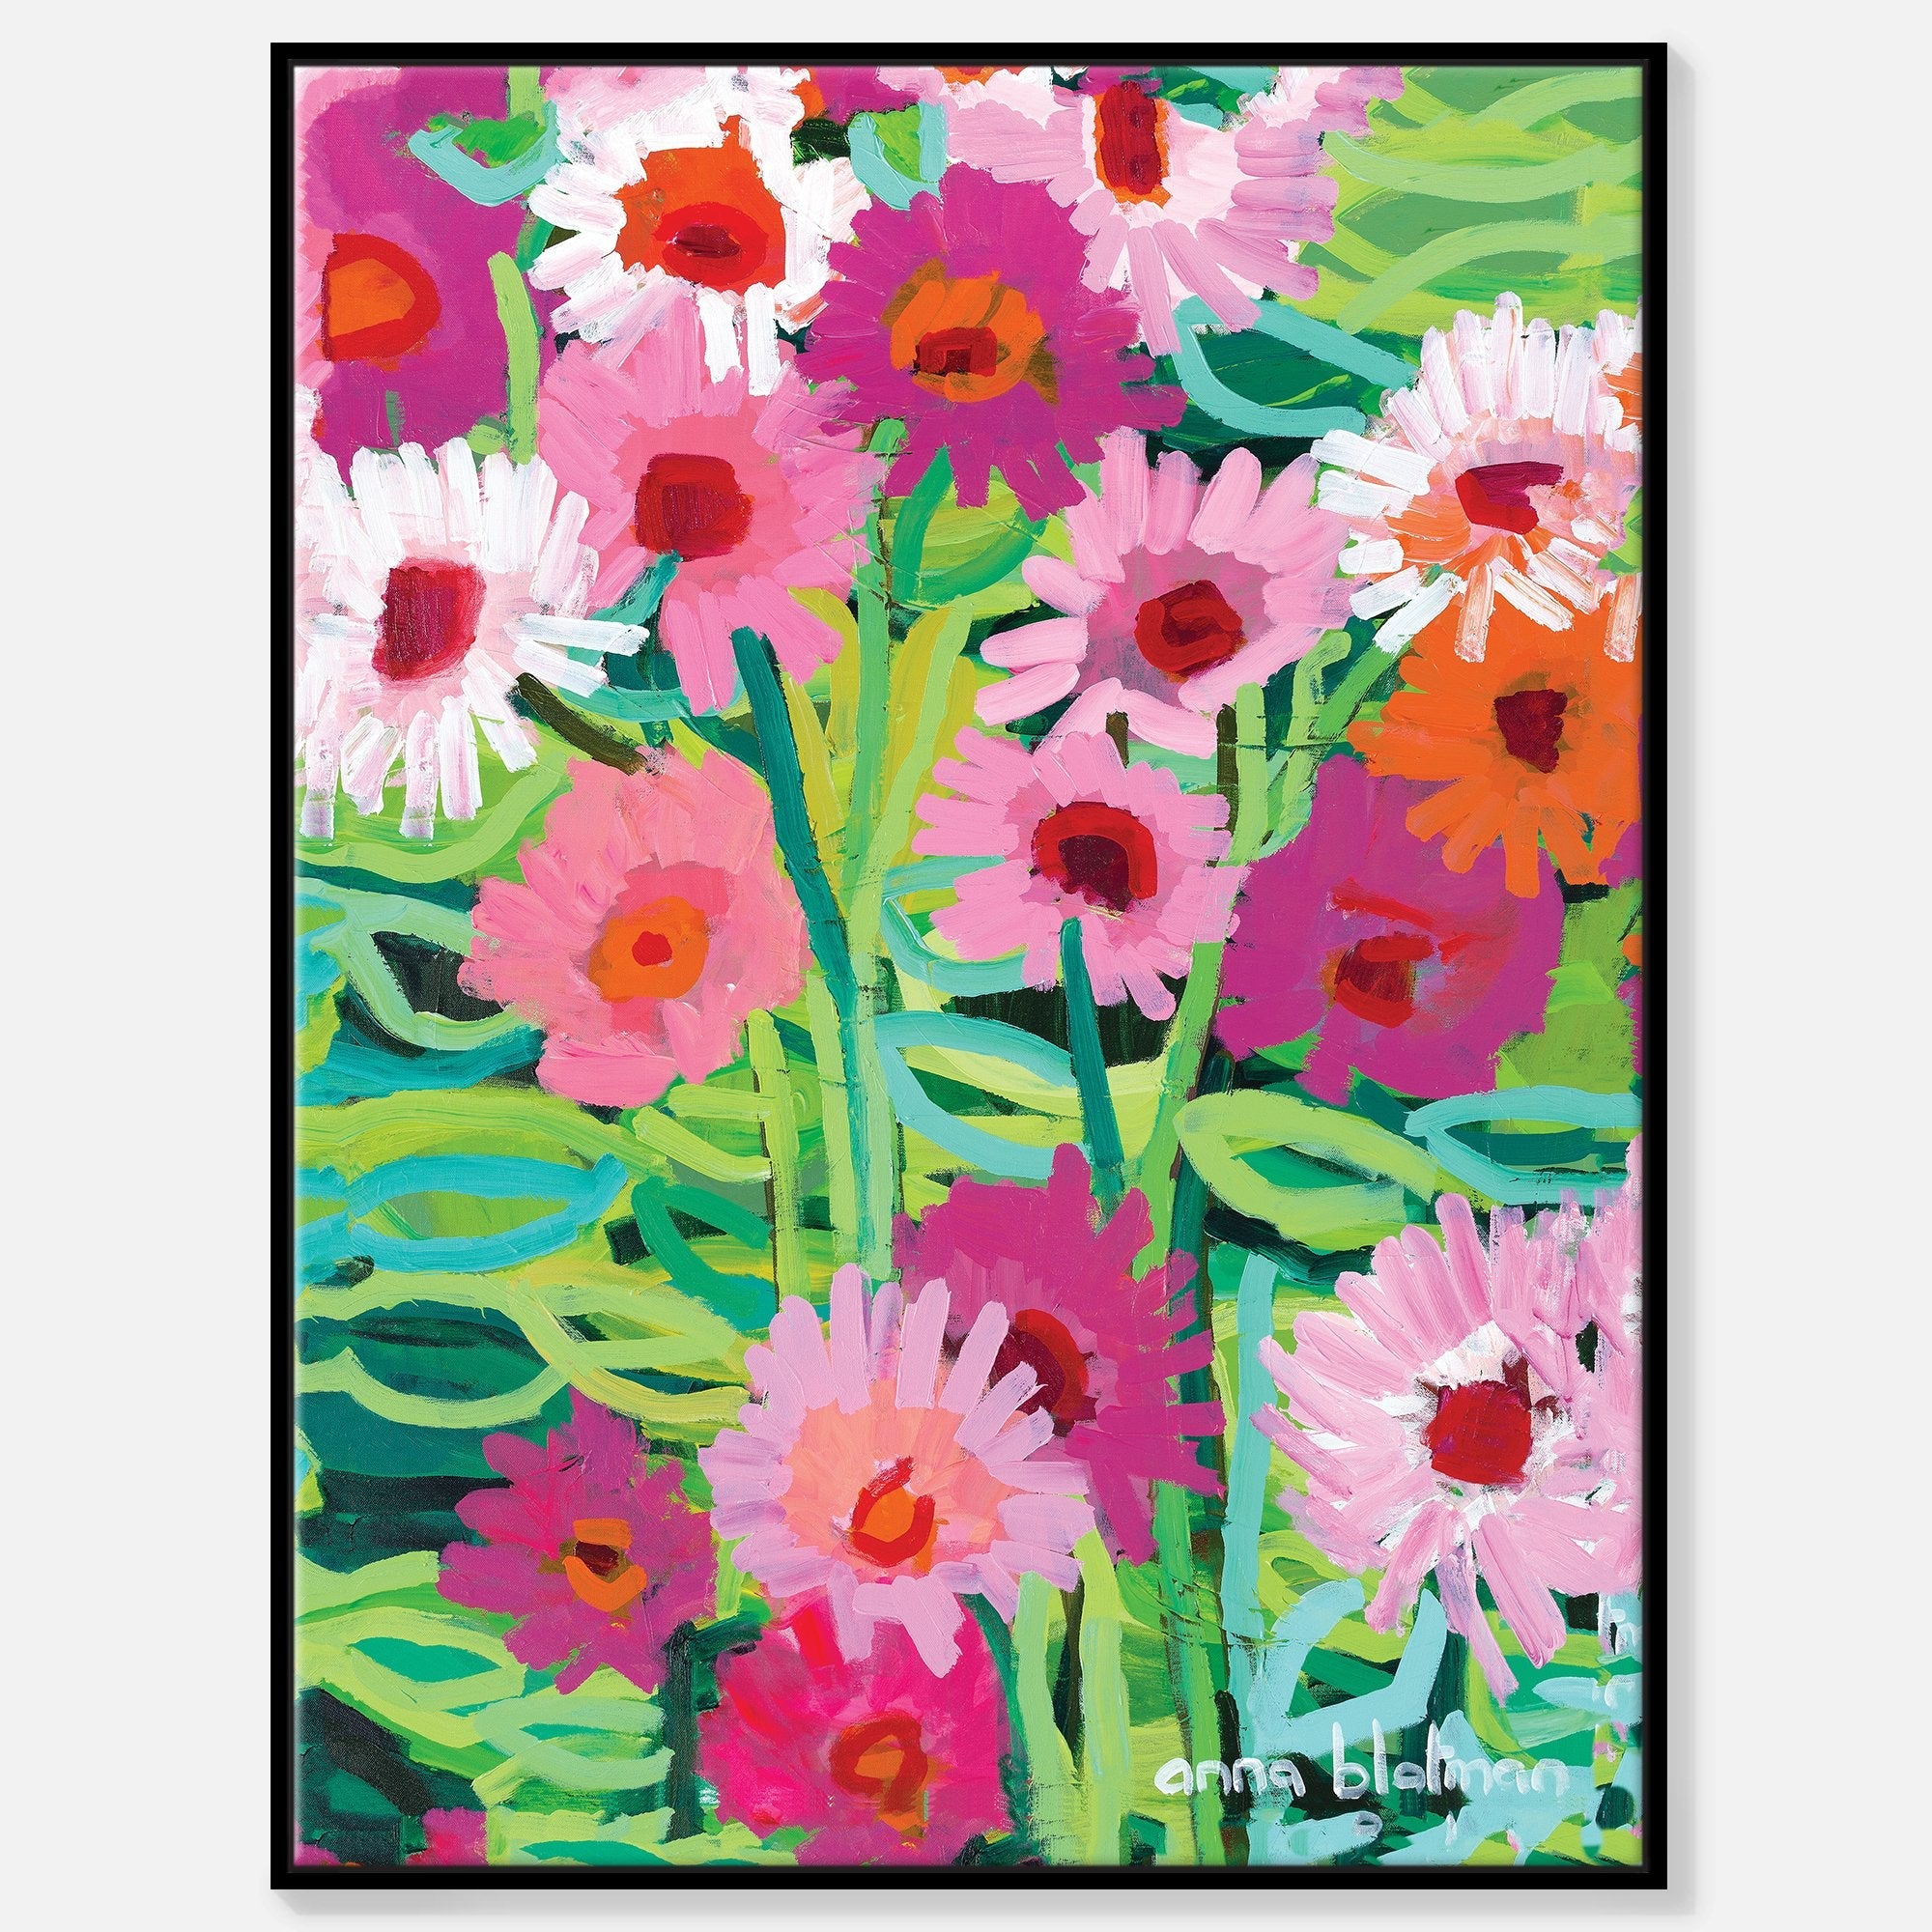 Maeve - Gallery Wrapped Canvas